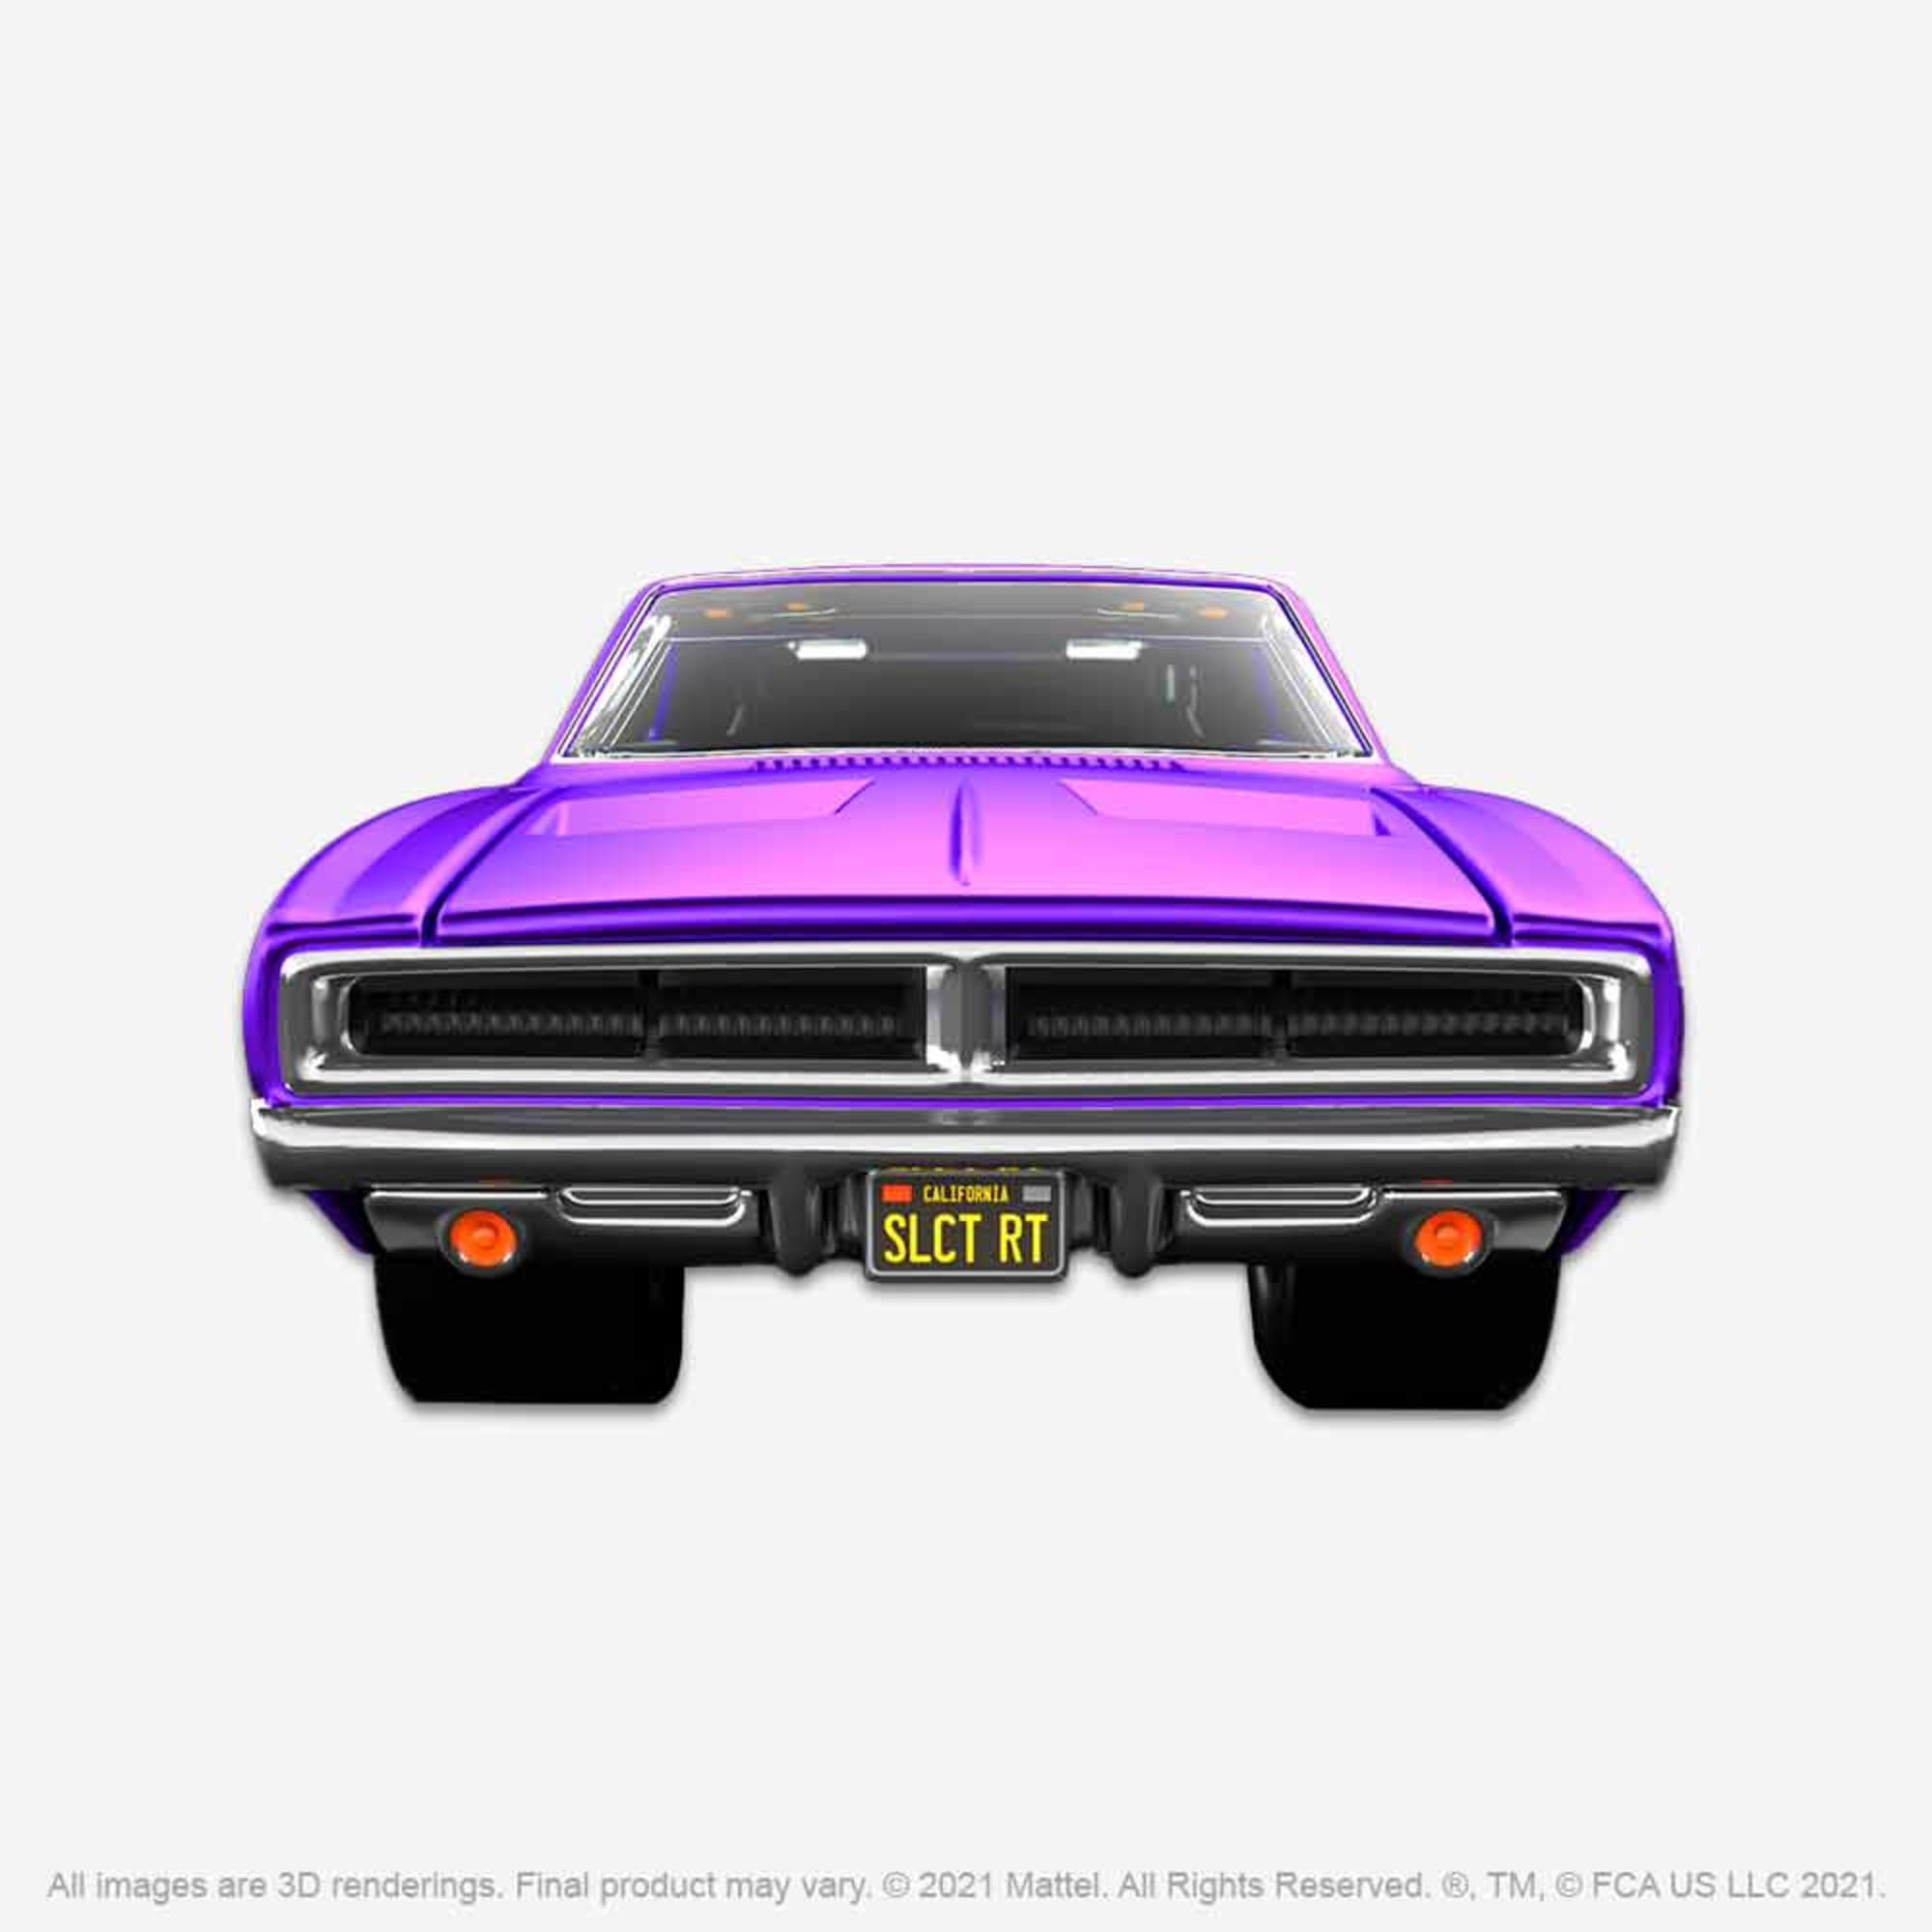 RLC sELECTIONs 1969 Dodge Charger R/T